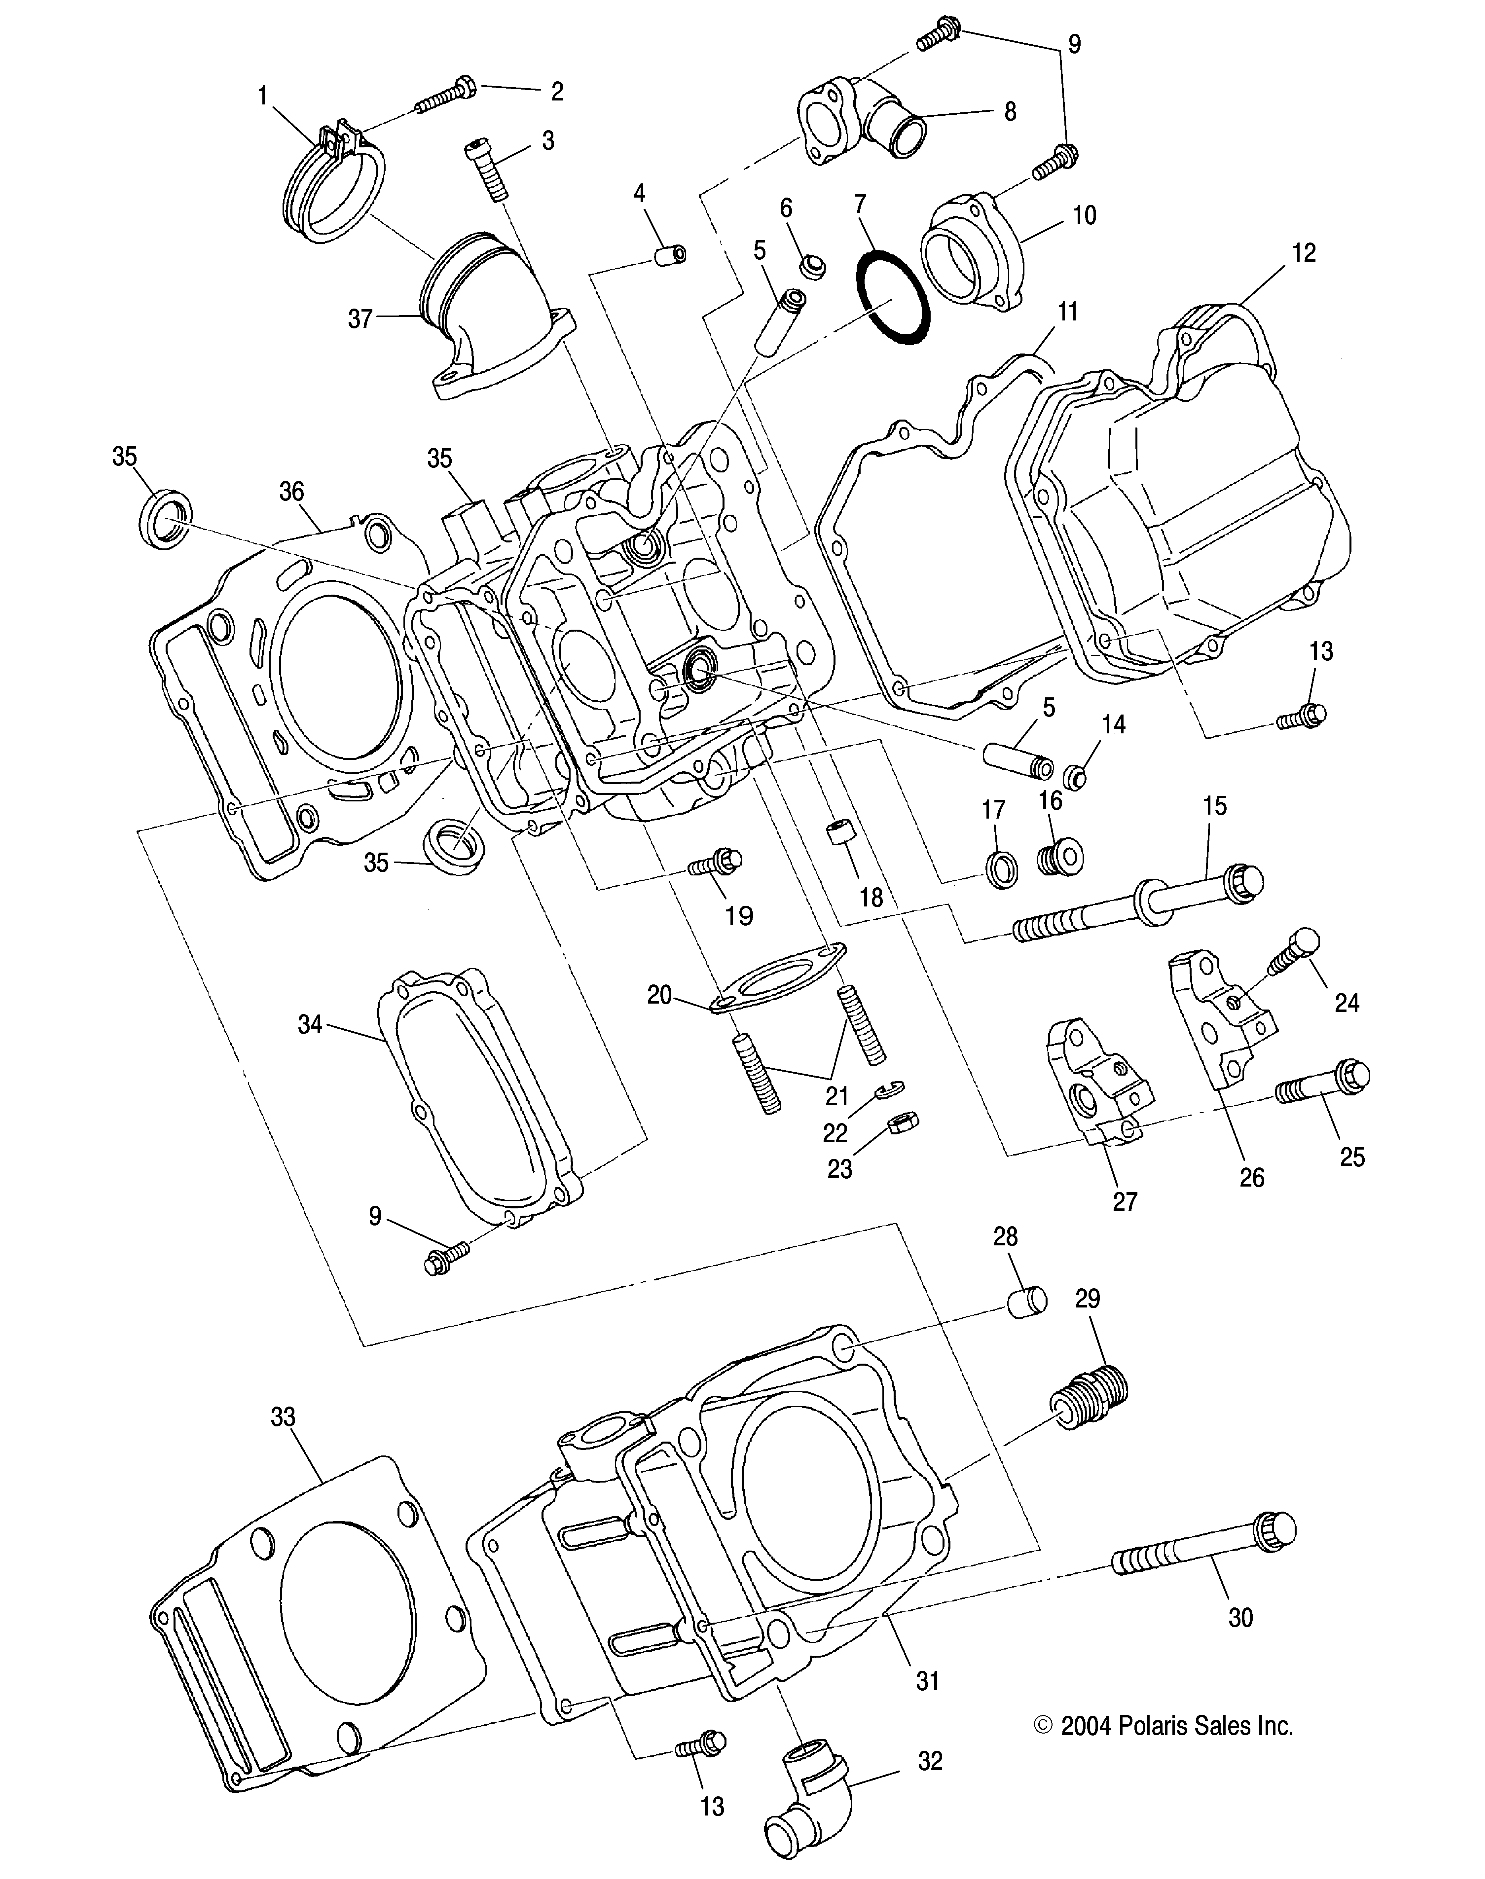 Part Number : 3084870 WATER OUT ADAPTER